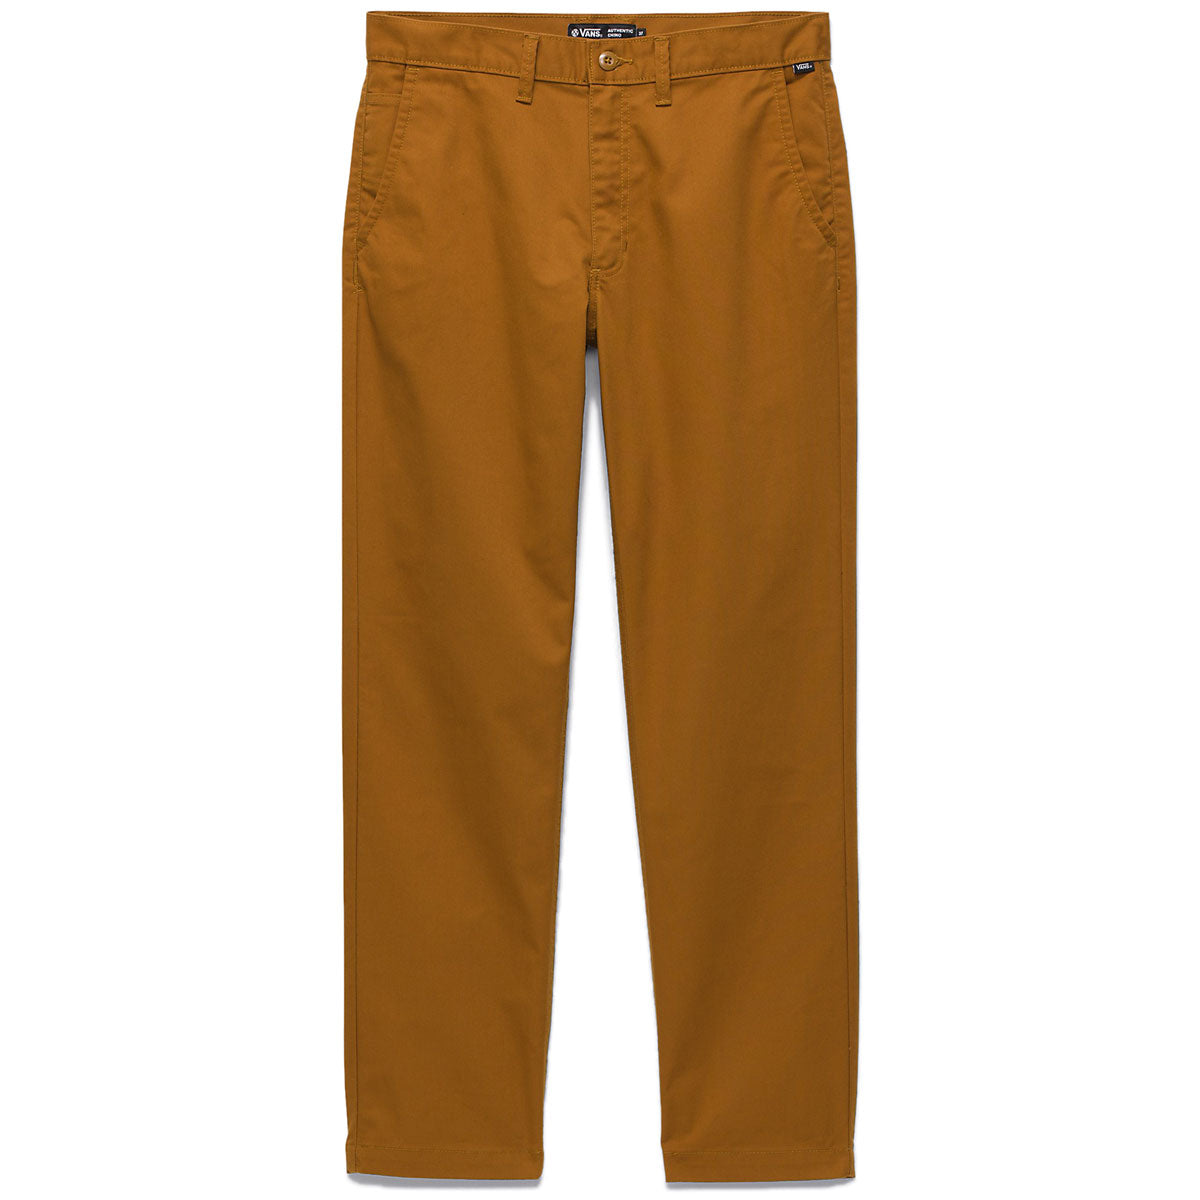 Vans Authentic Chino Relaxed Pants - Fatal Floral Golden Brown image 1